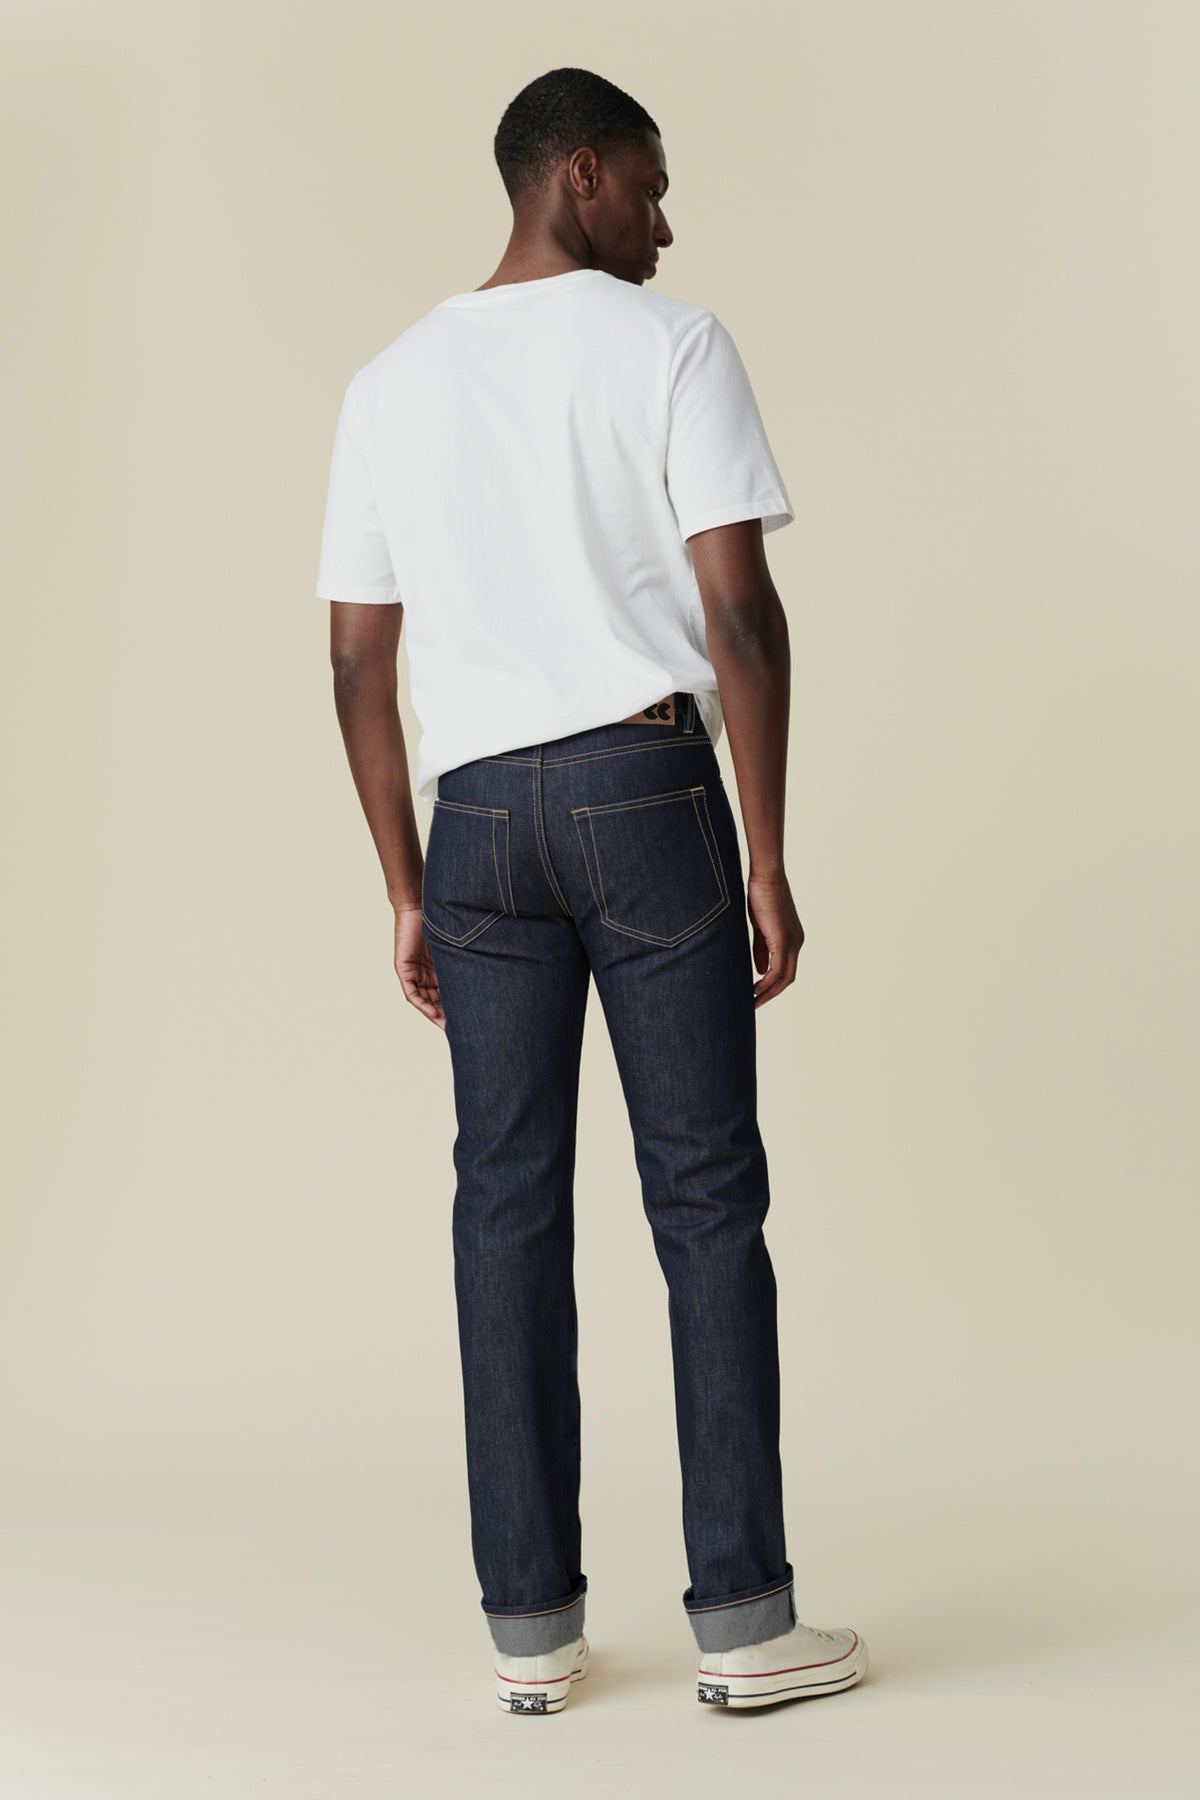 
            Full body image of black male from behind wearing straight leg jeans in indigo